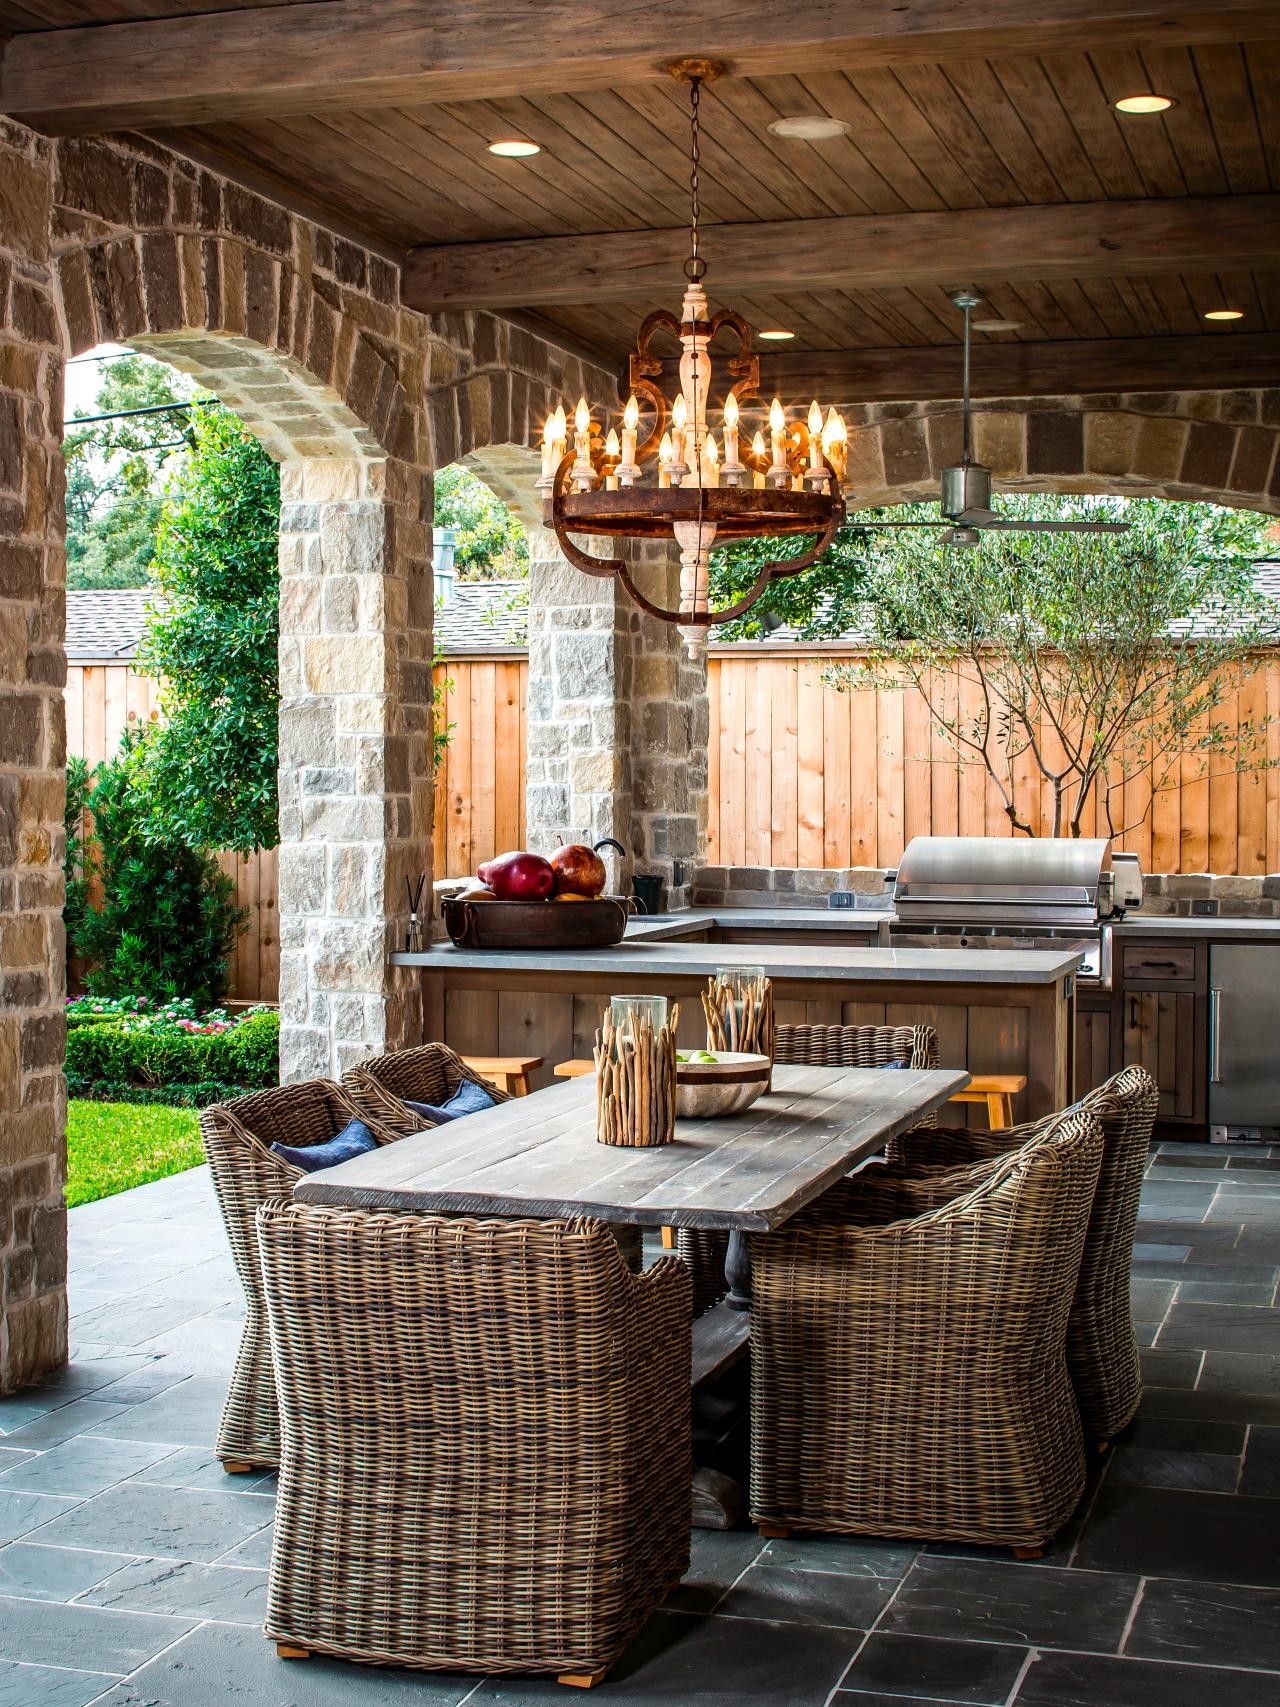 Chandelier outdoor dining area wicker chairs